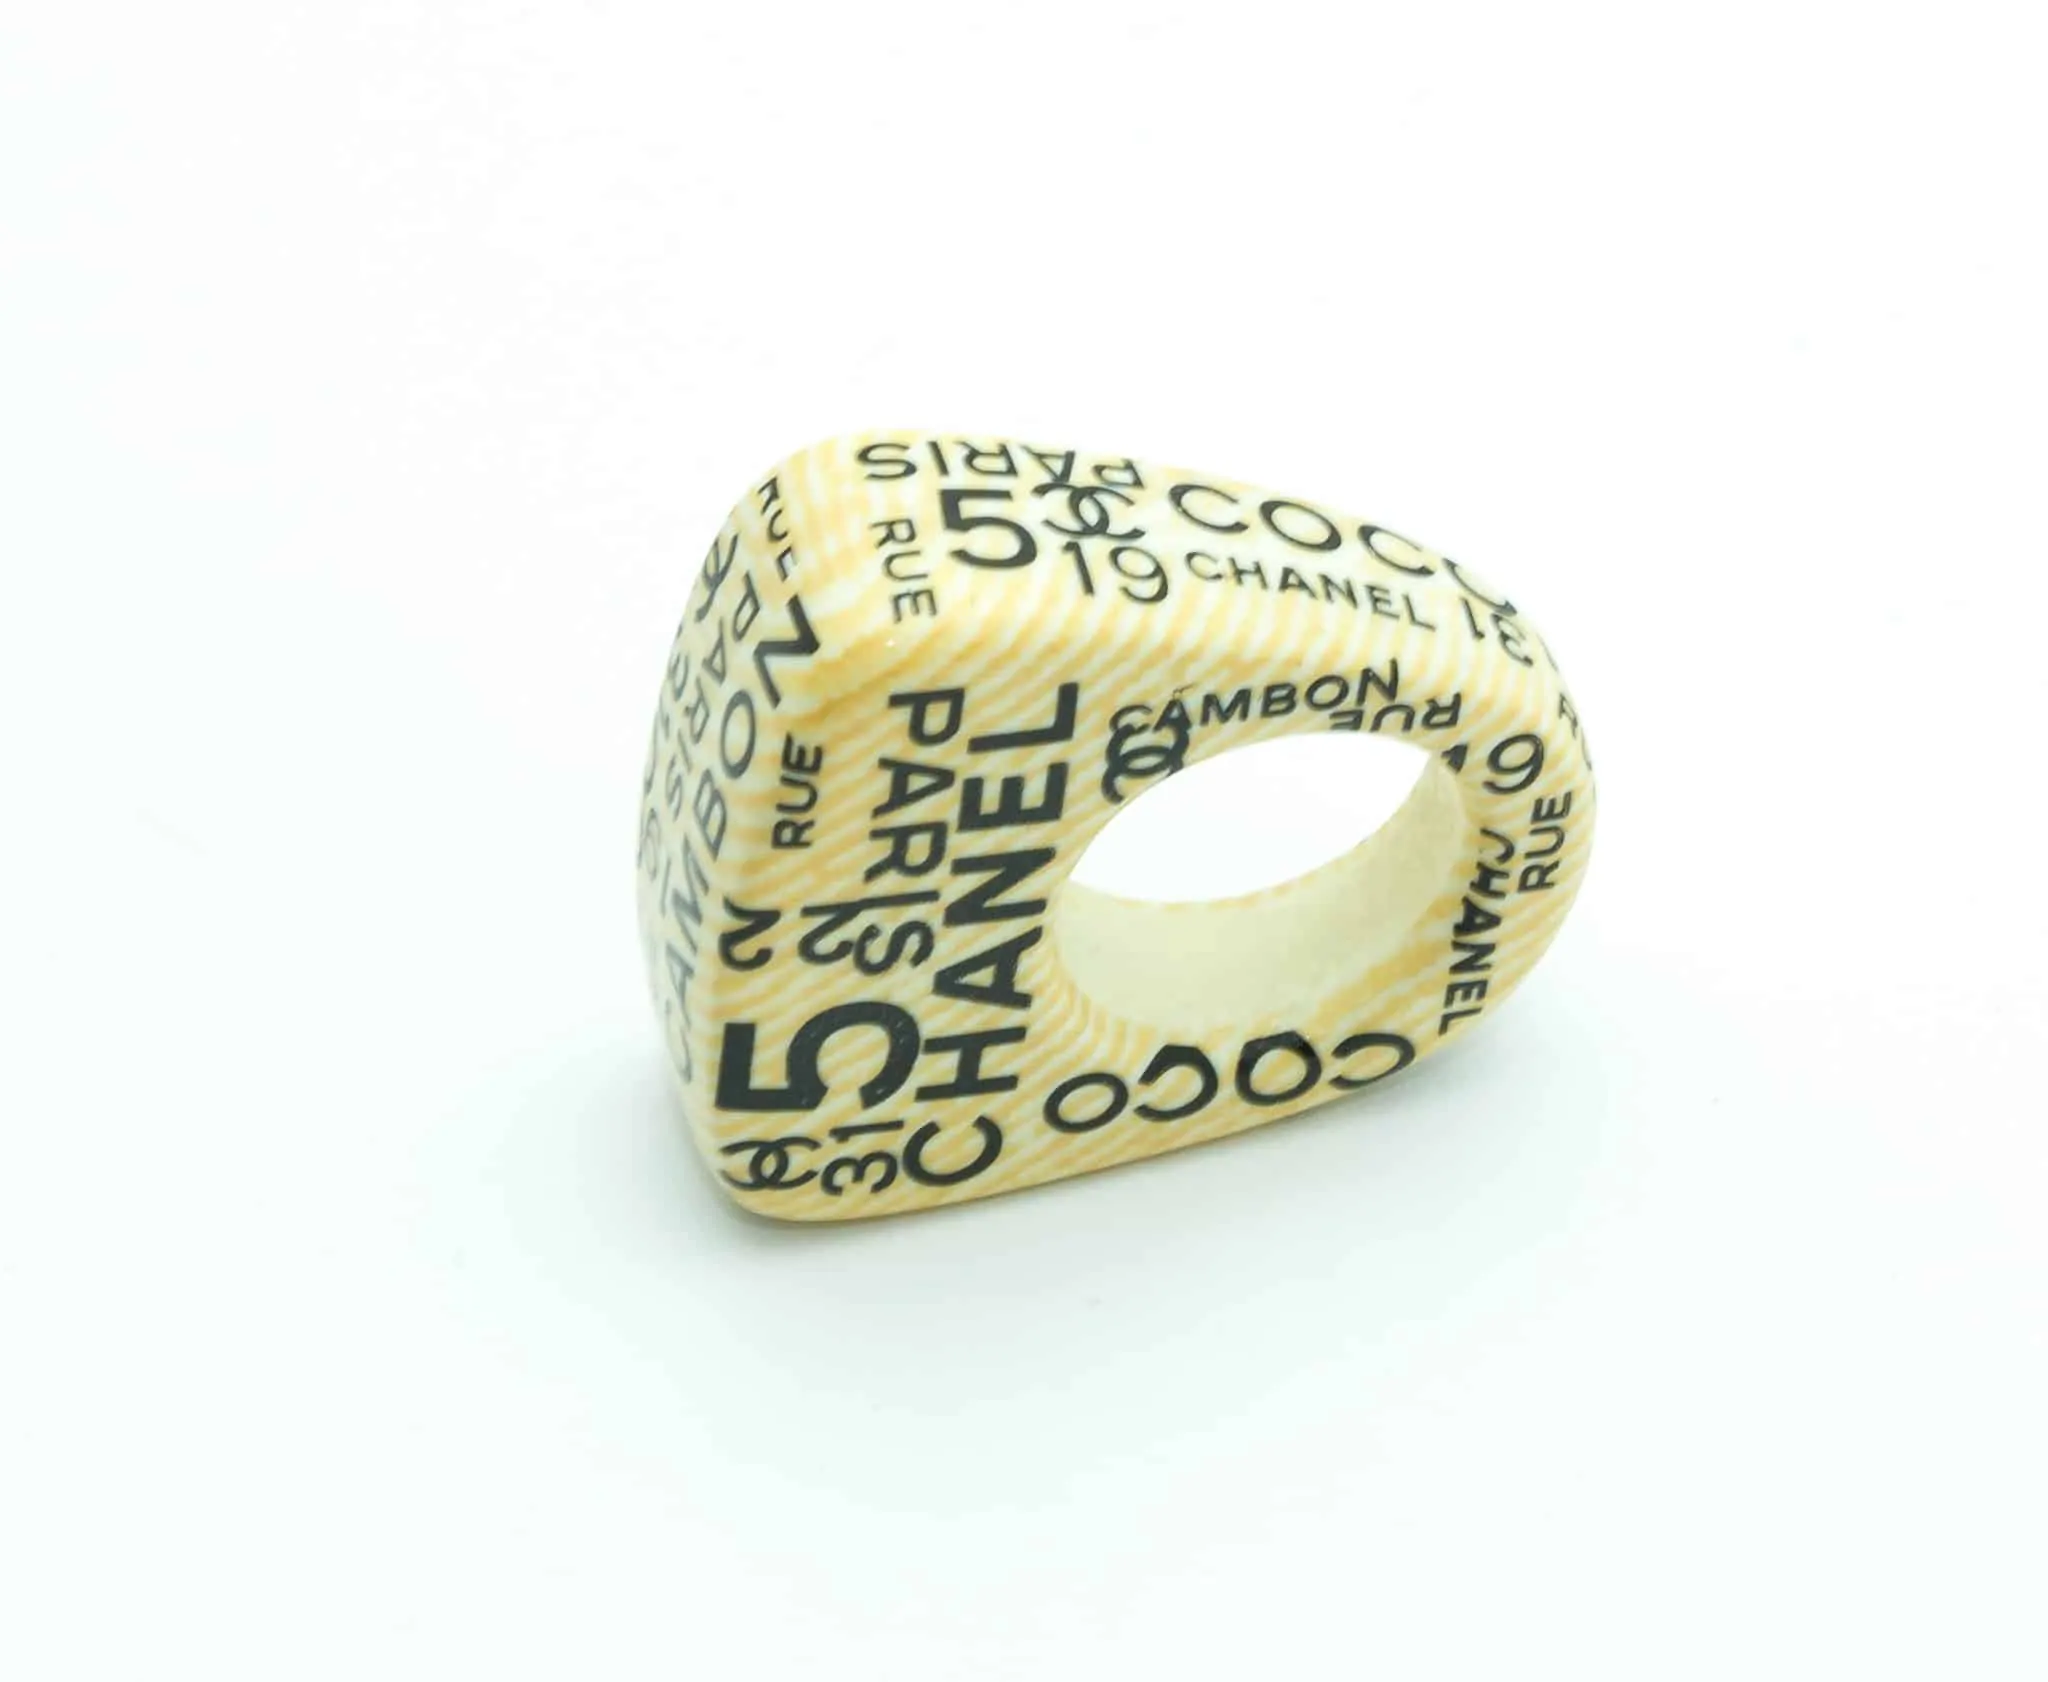 Chanel Cambon logo resin vintage ring c.2000 - Katheley's